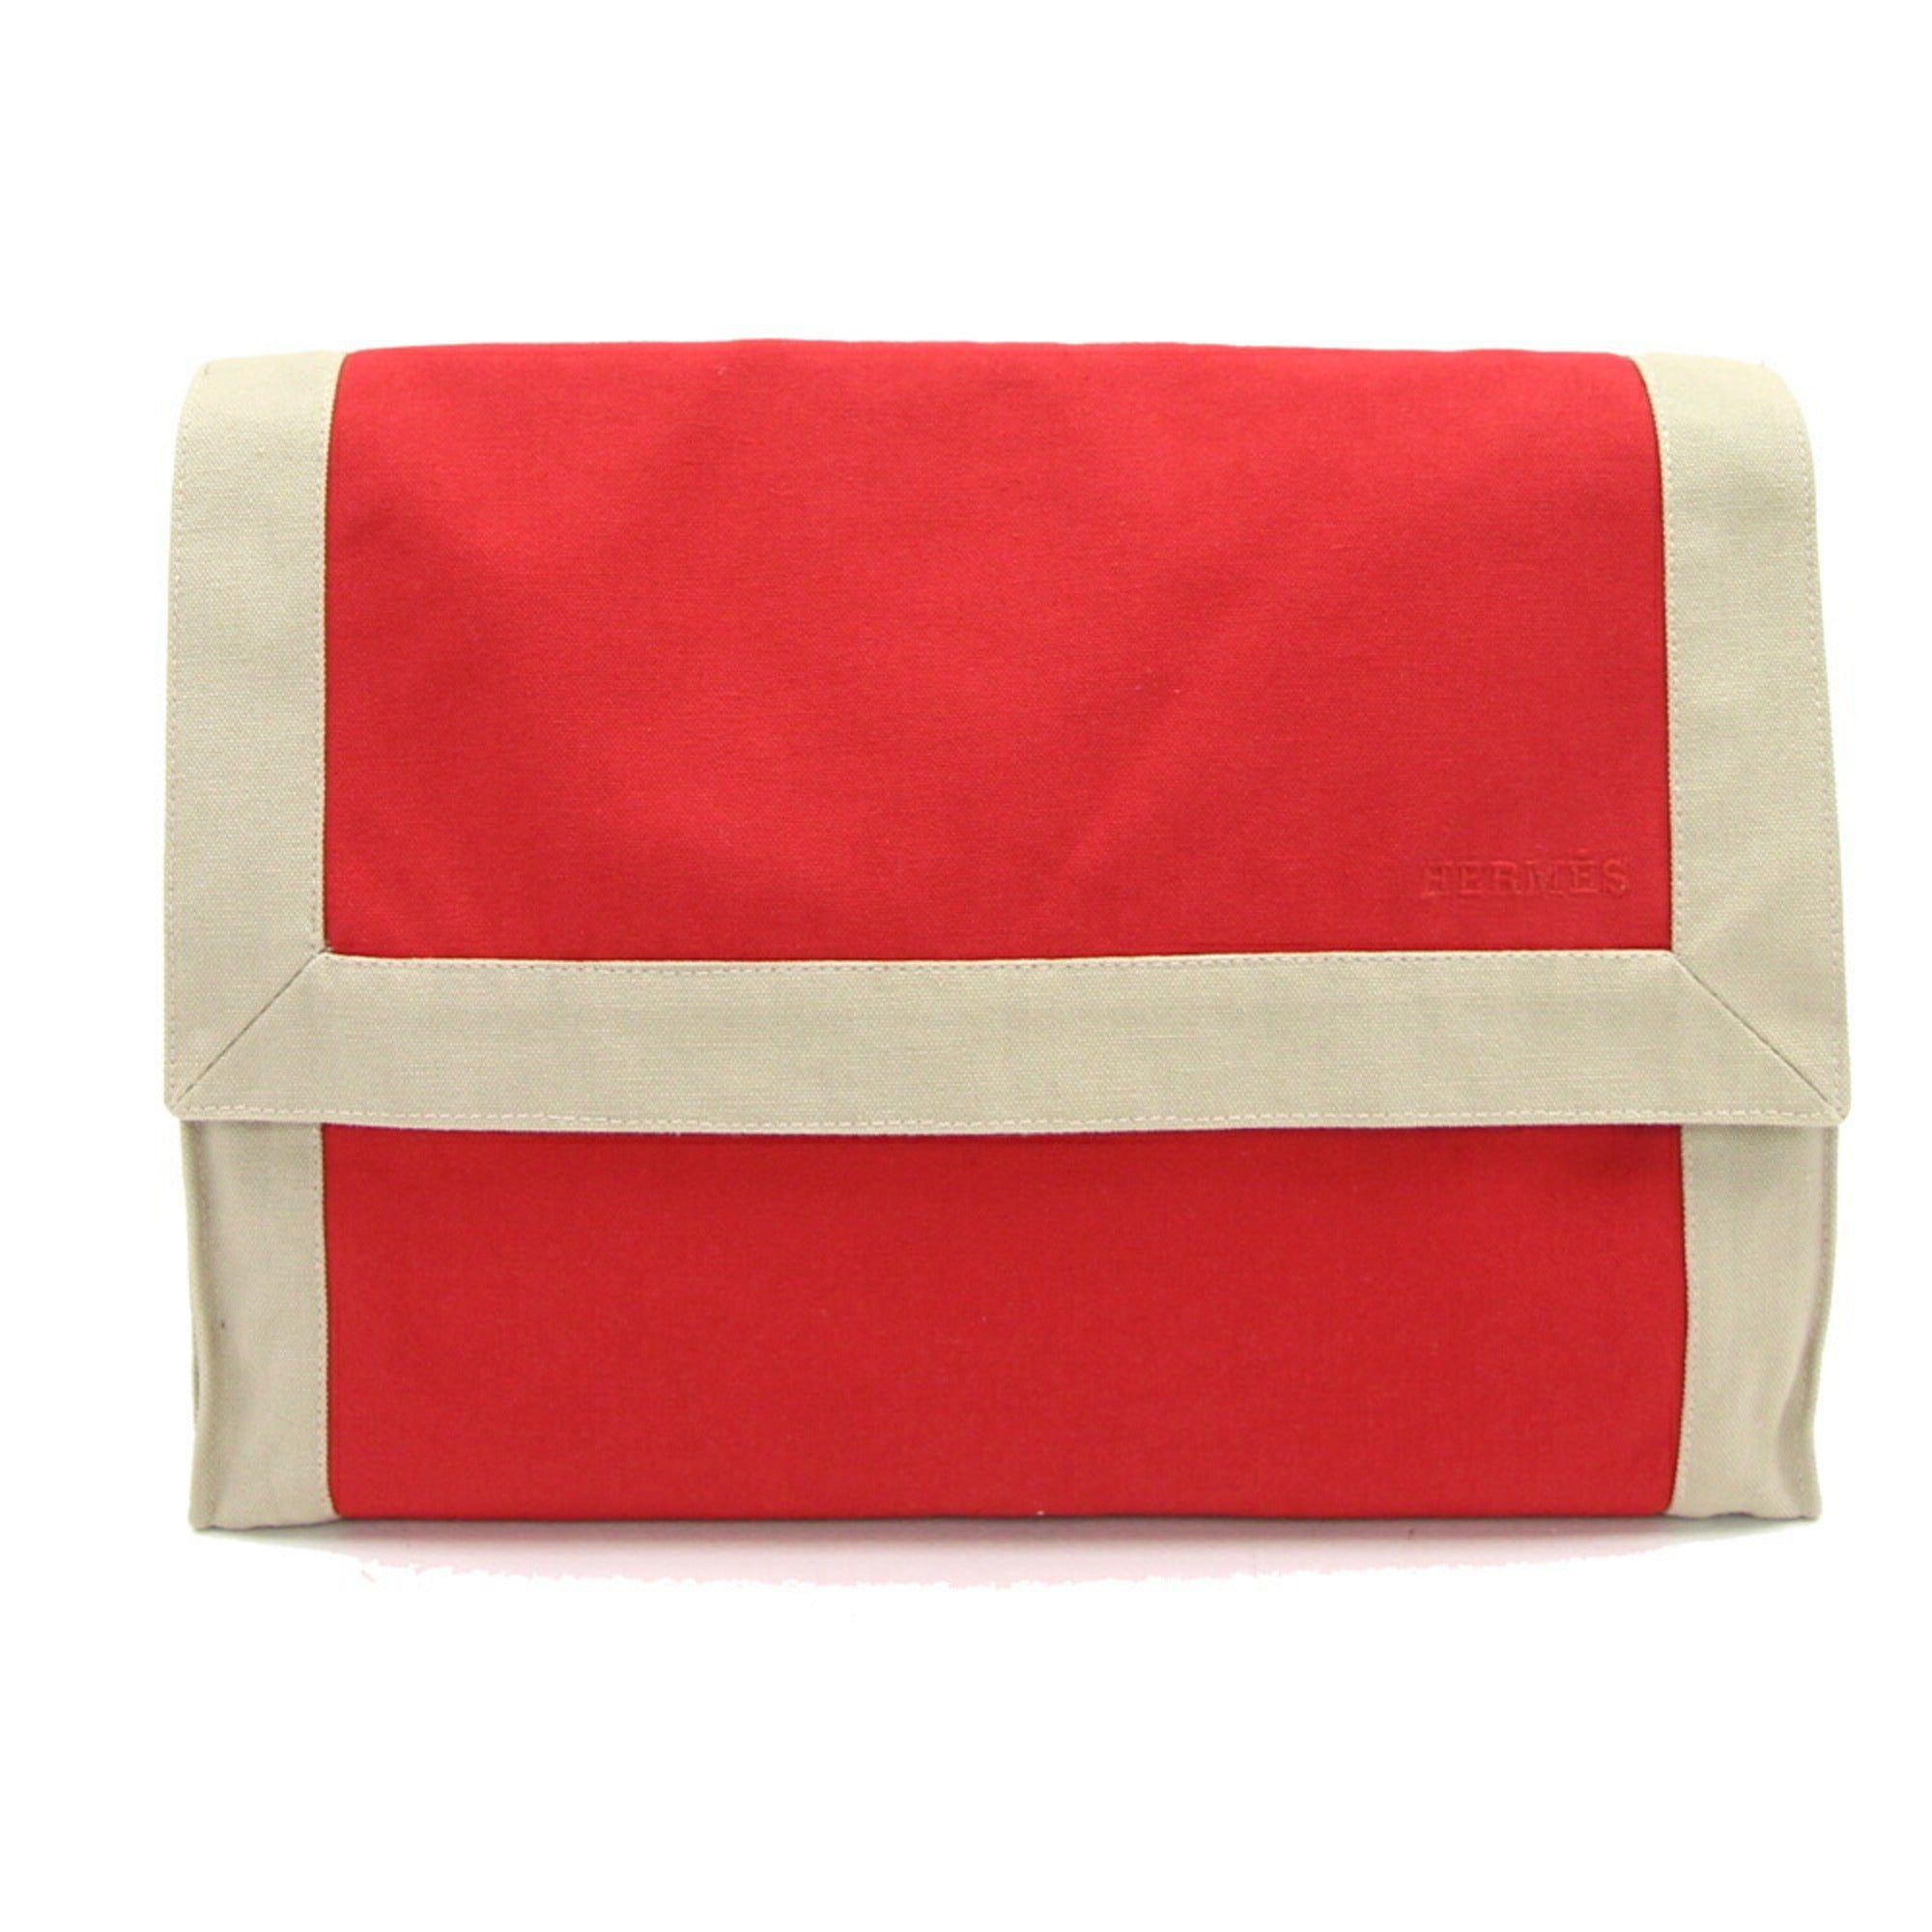 HERMES Clutch Bag Tapidosel Red Beige Canvas Pouch Women's